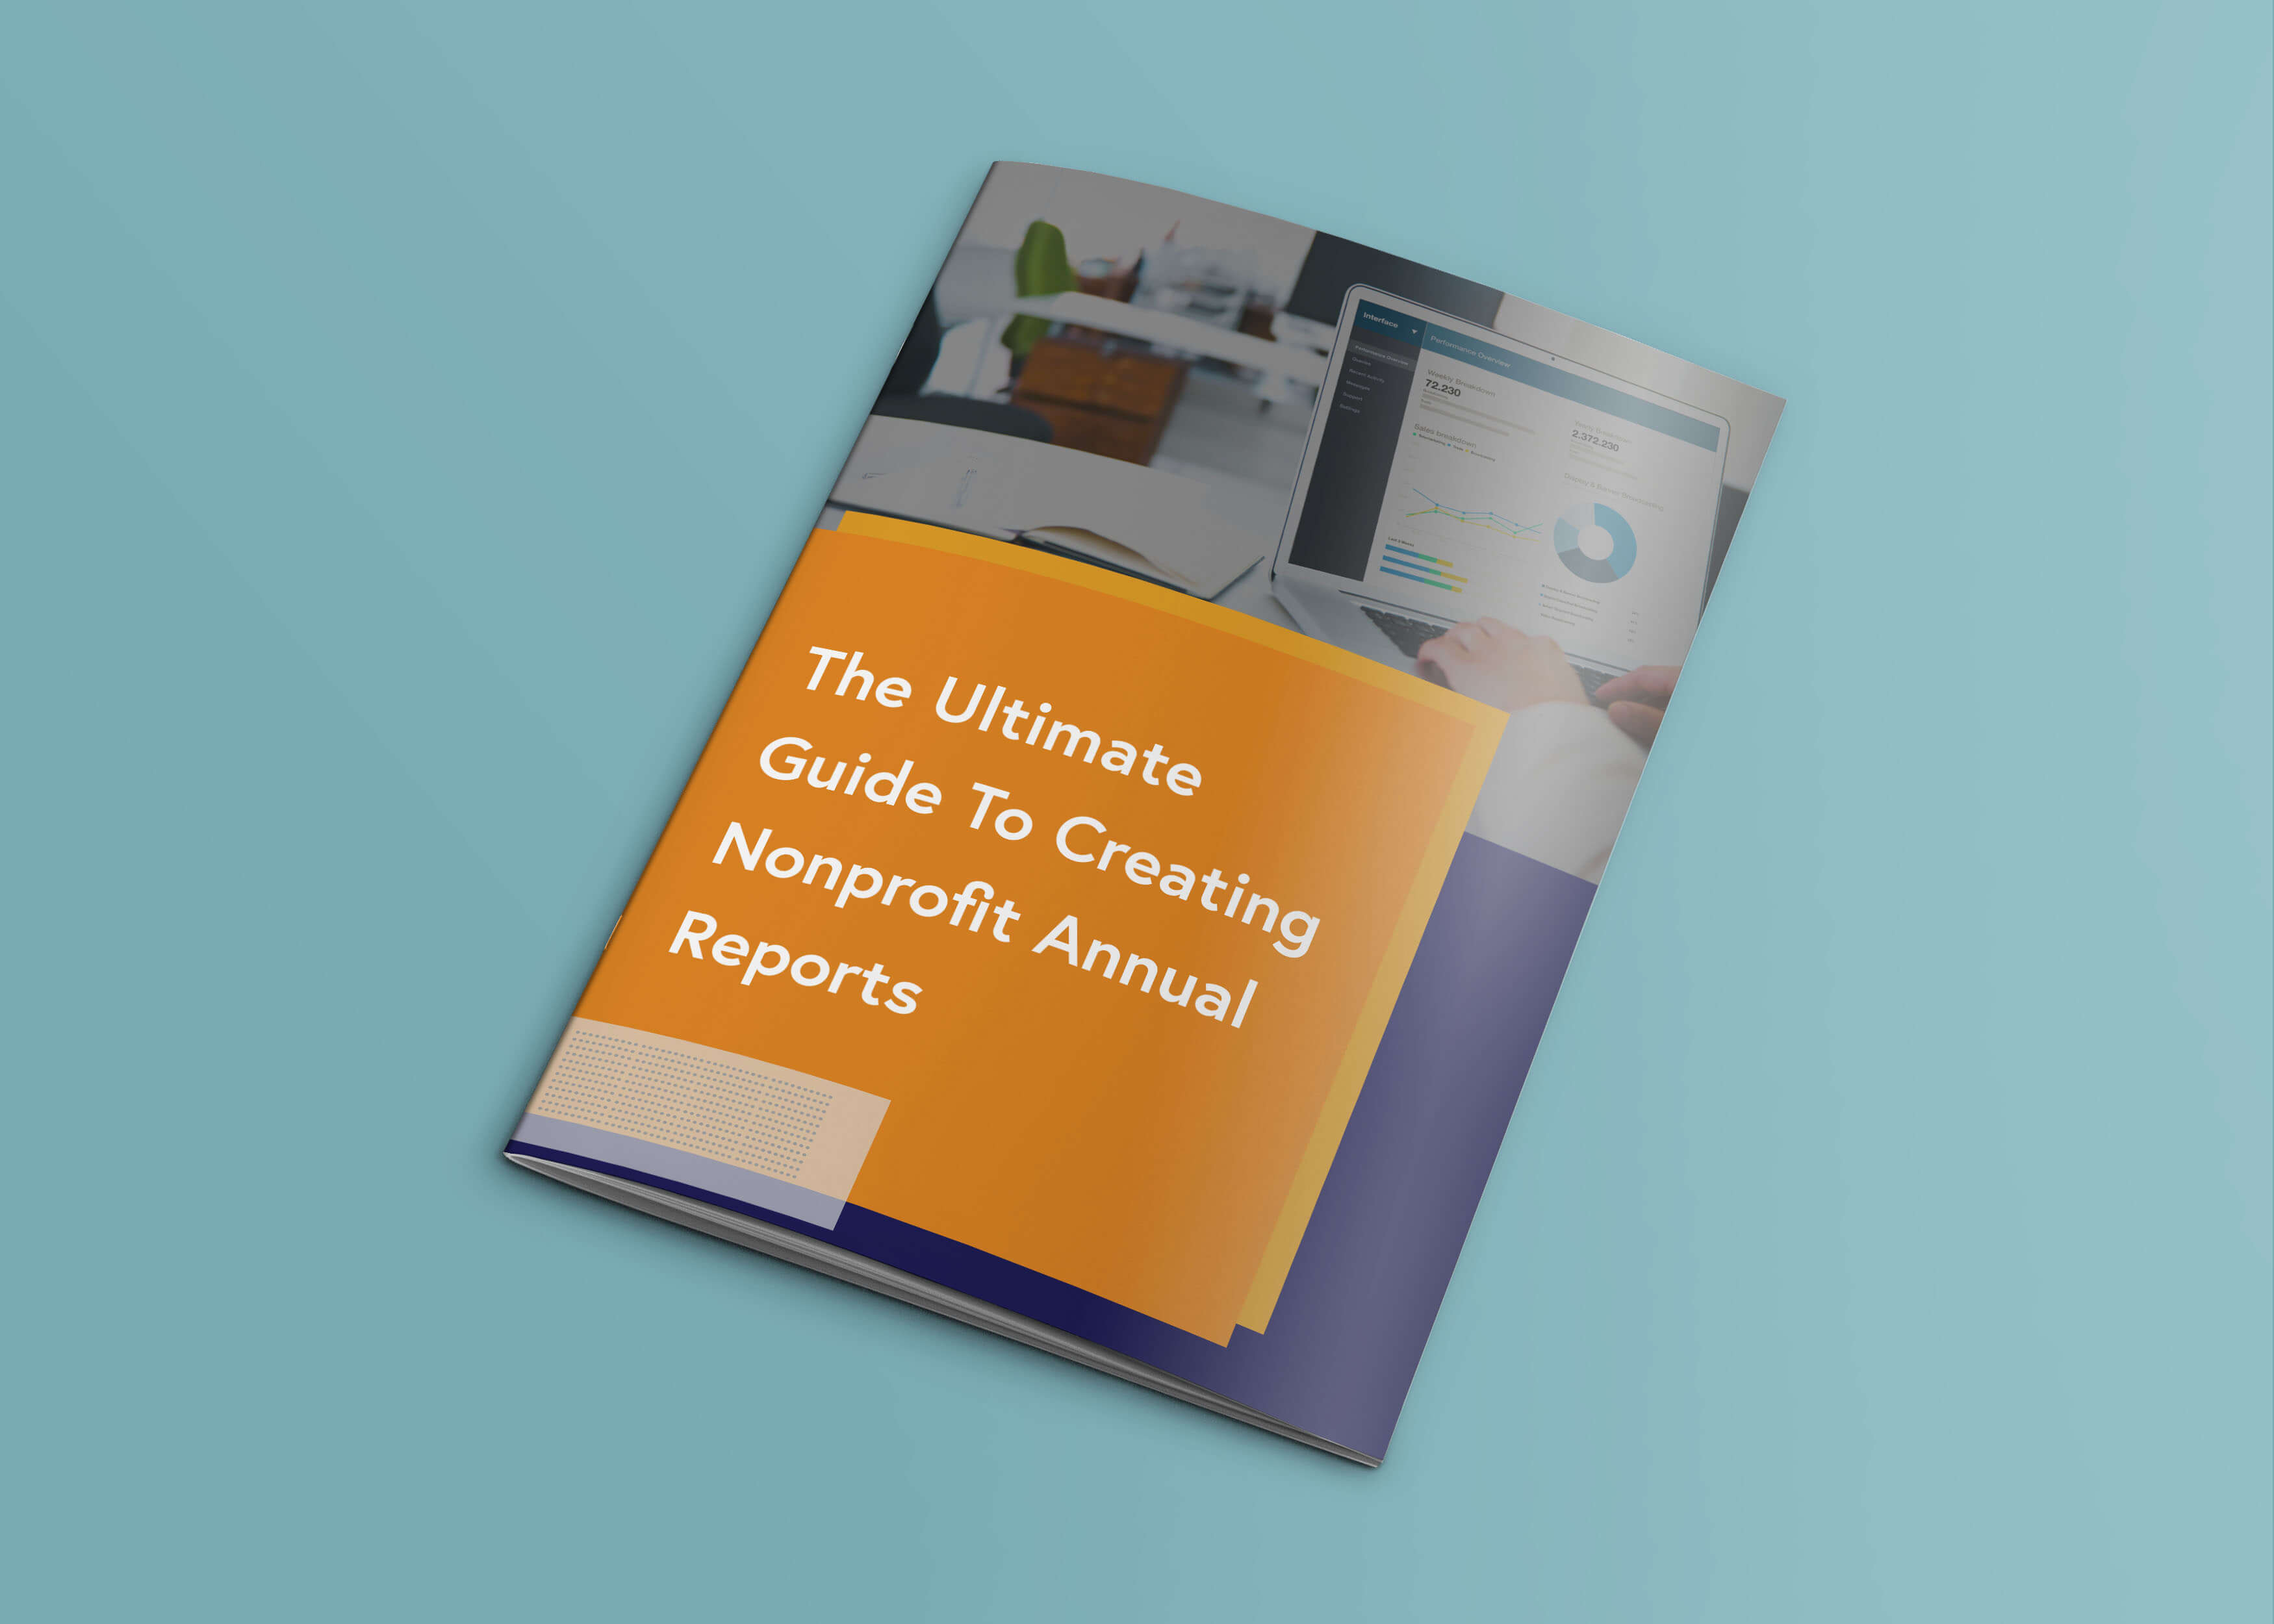 The Ultimate Guide To Creating Nonprofit Annual Reports Inside Nonprofit Annual Report Template